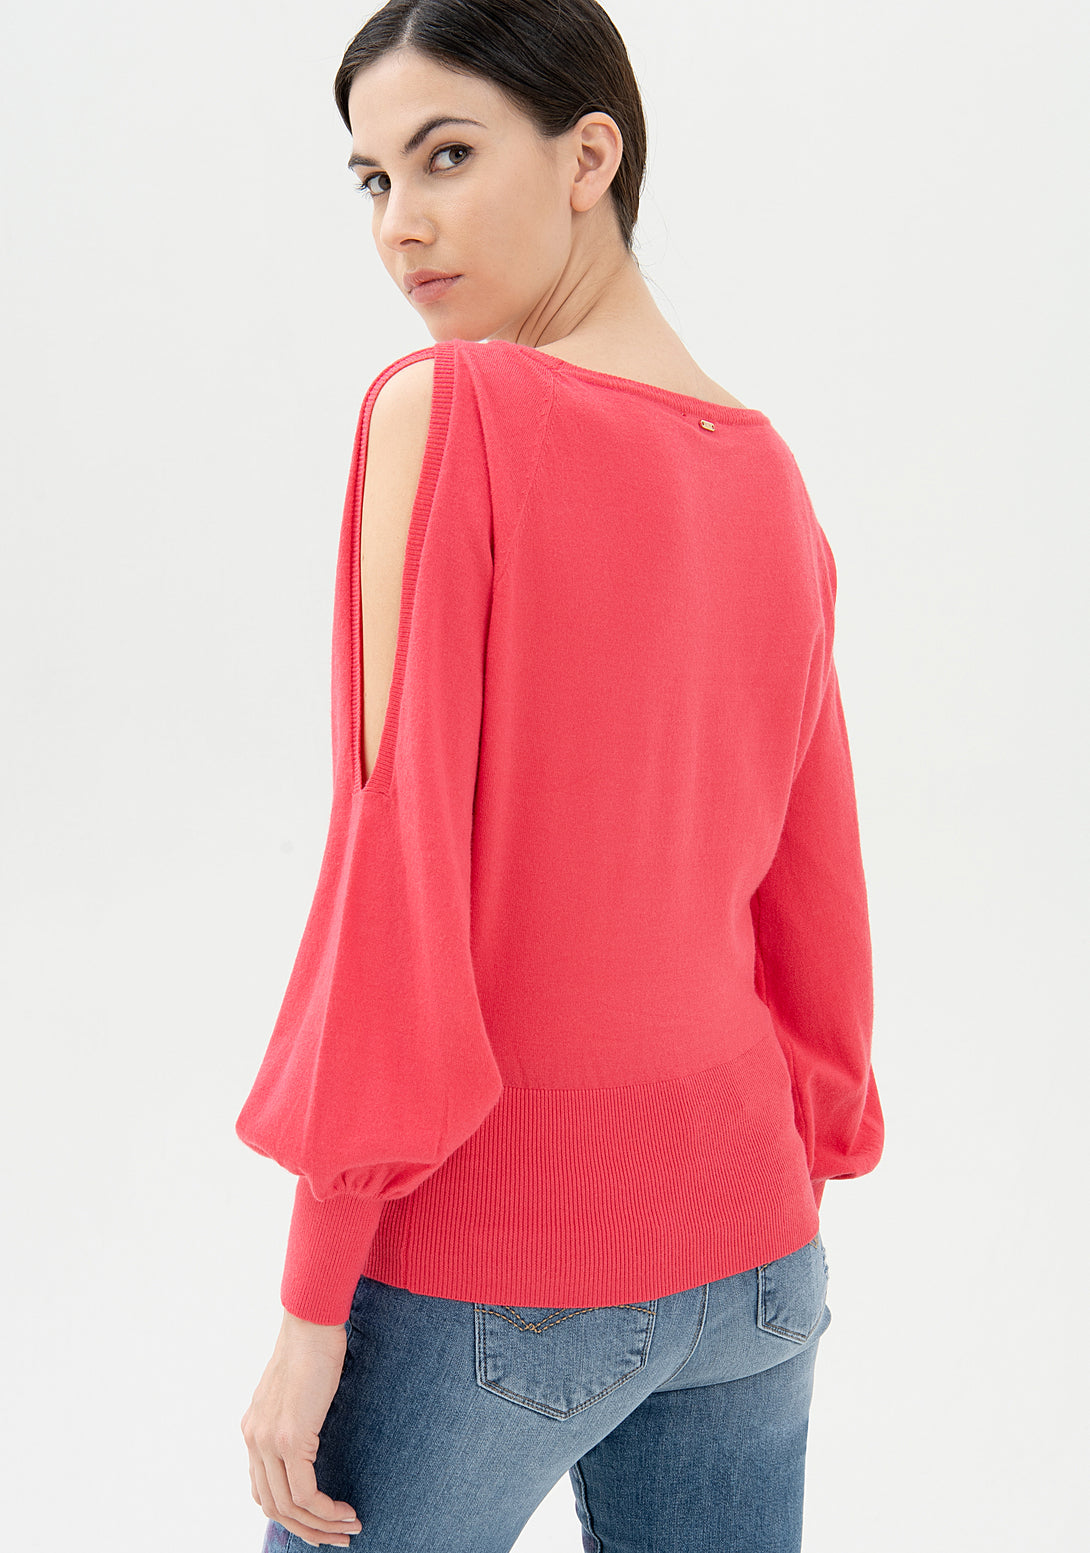 Knitwear regular fit with opening at the shoulders